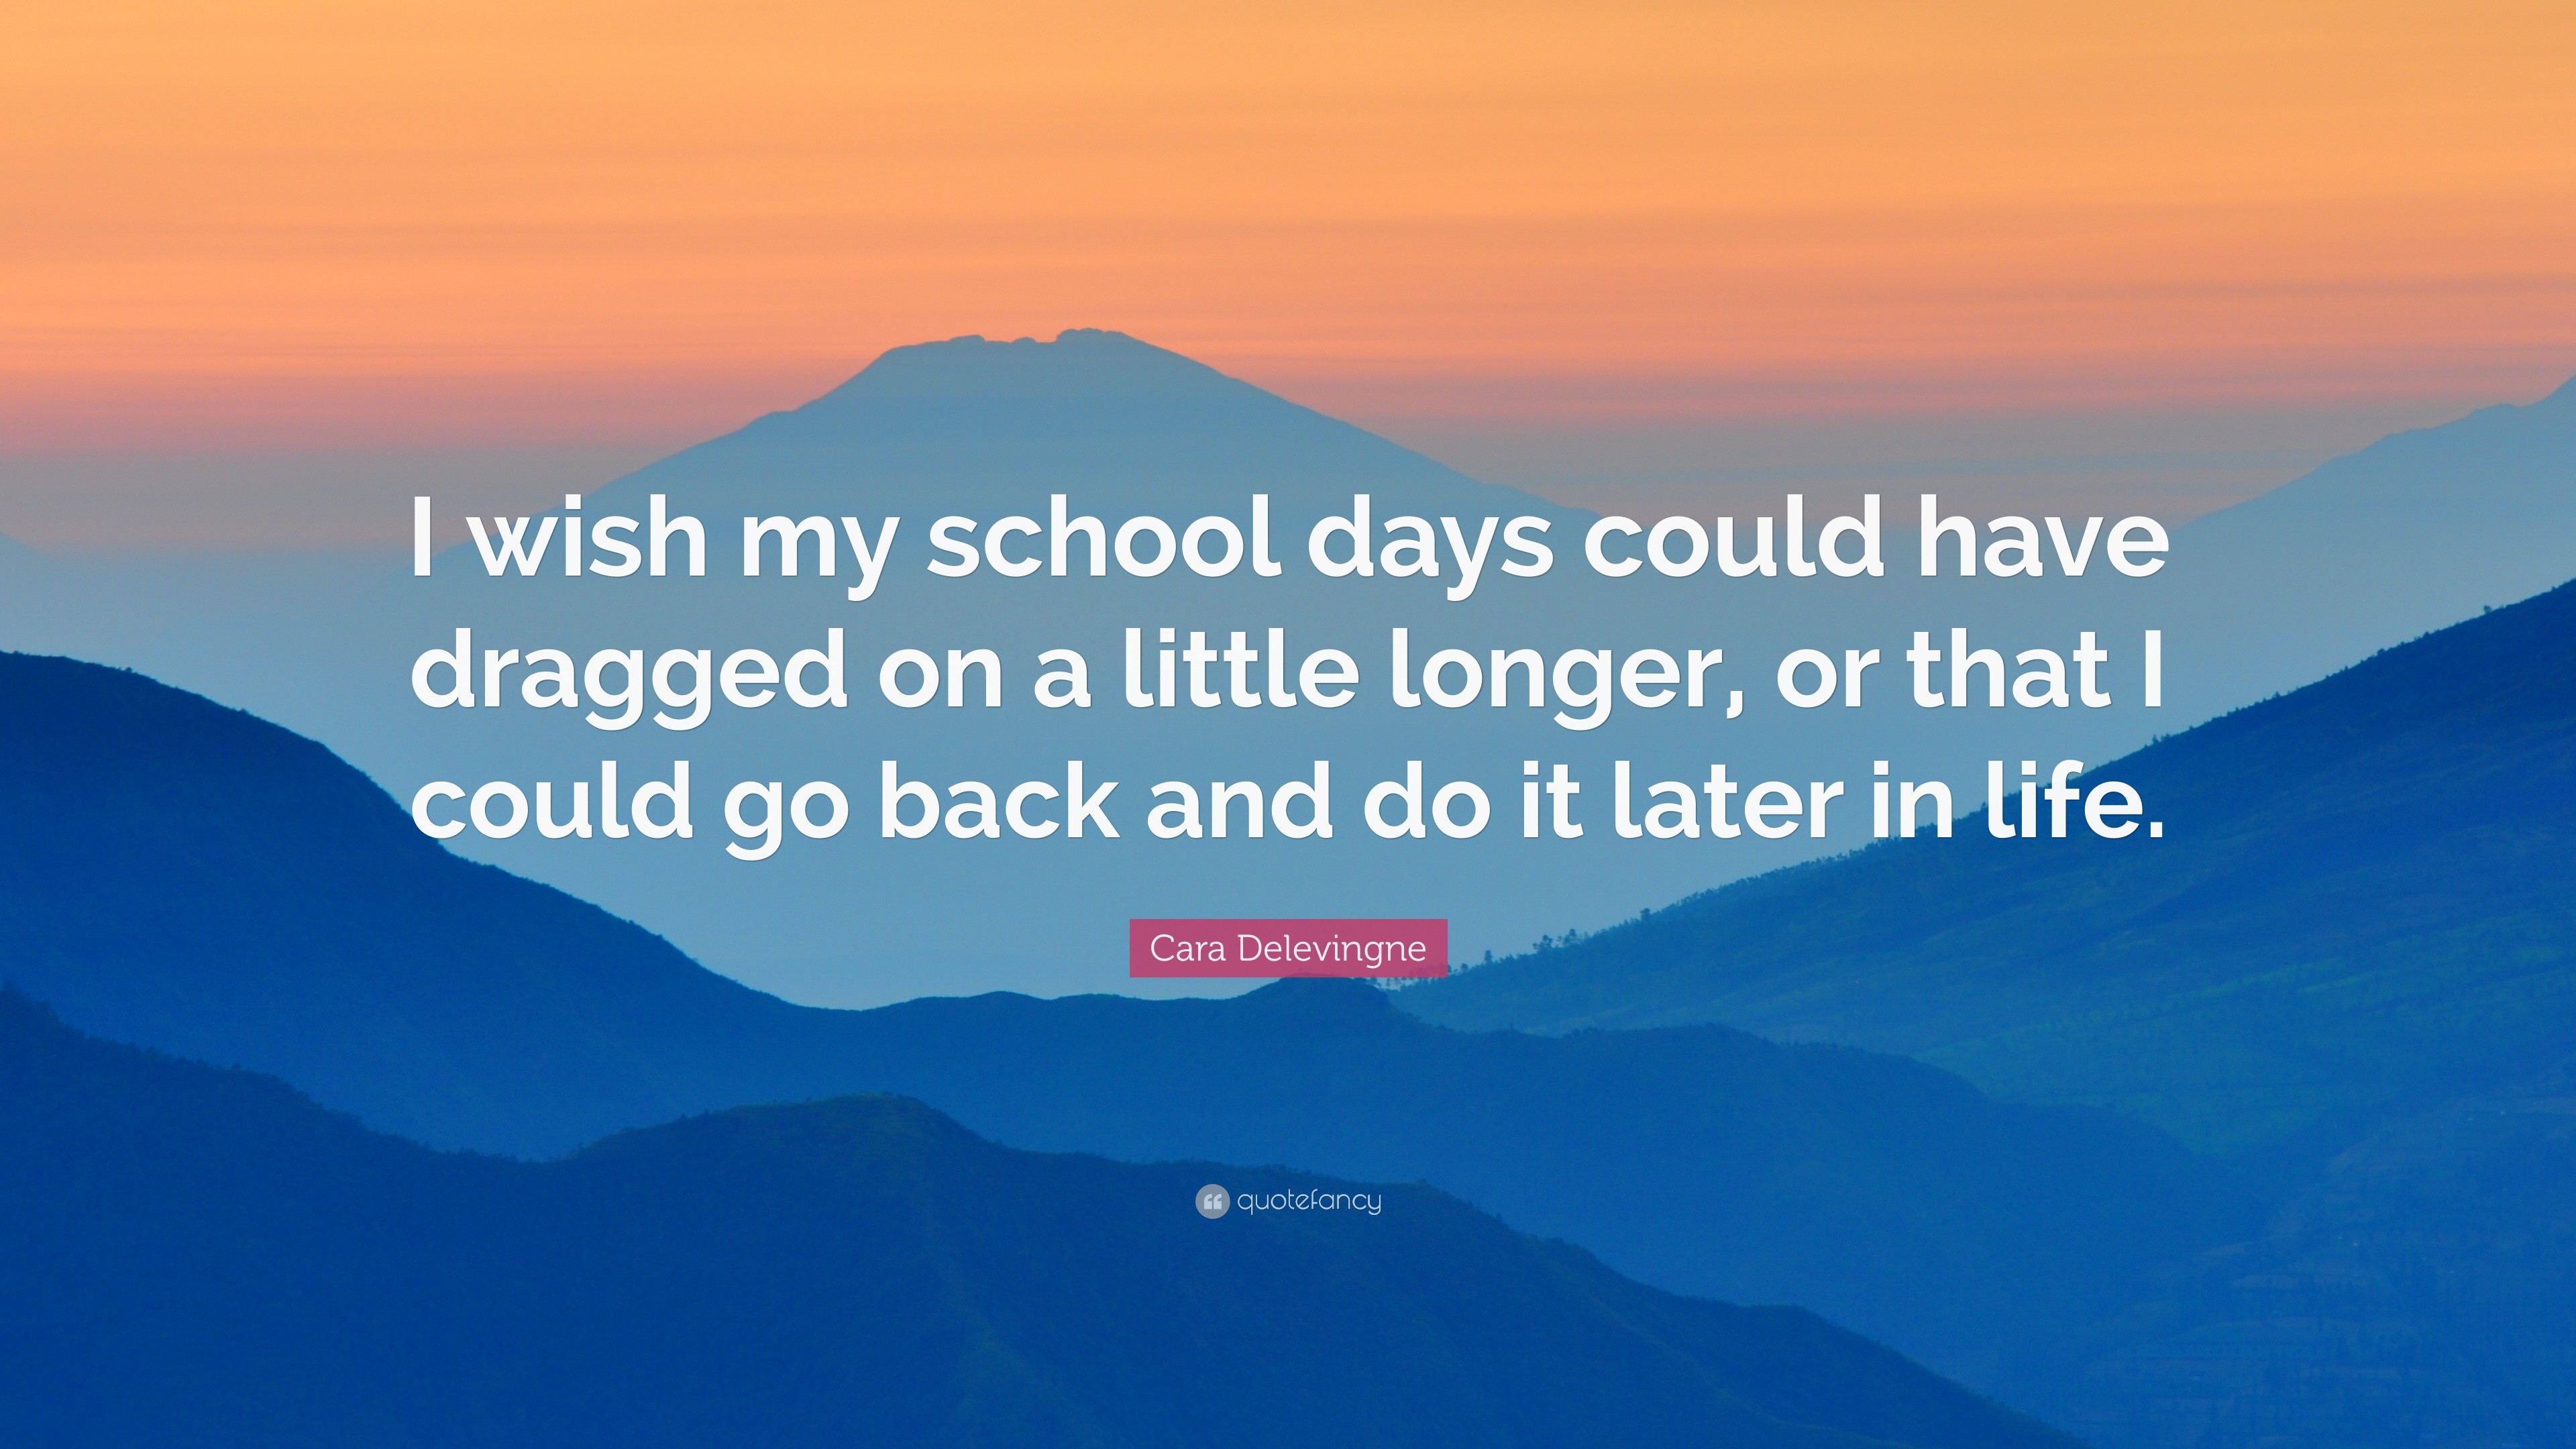 3840x2160 Cara Delevingne Quote: “I wish my school days could have dragged on a little